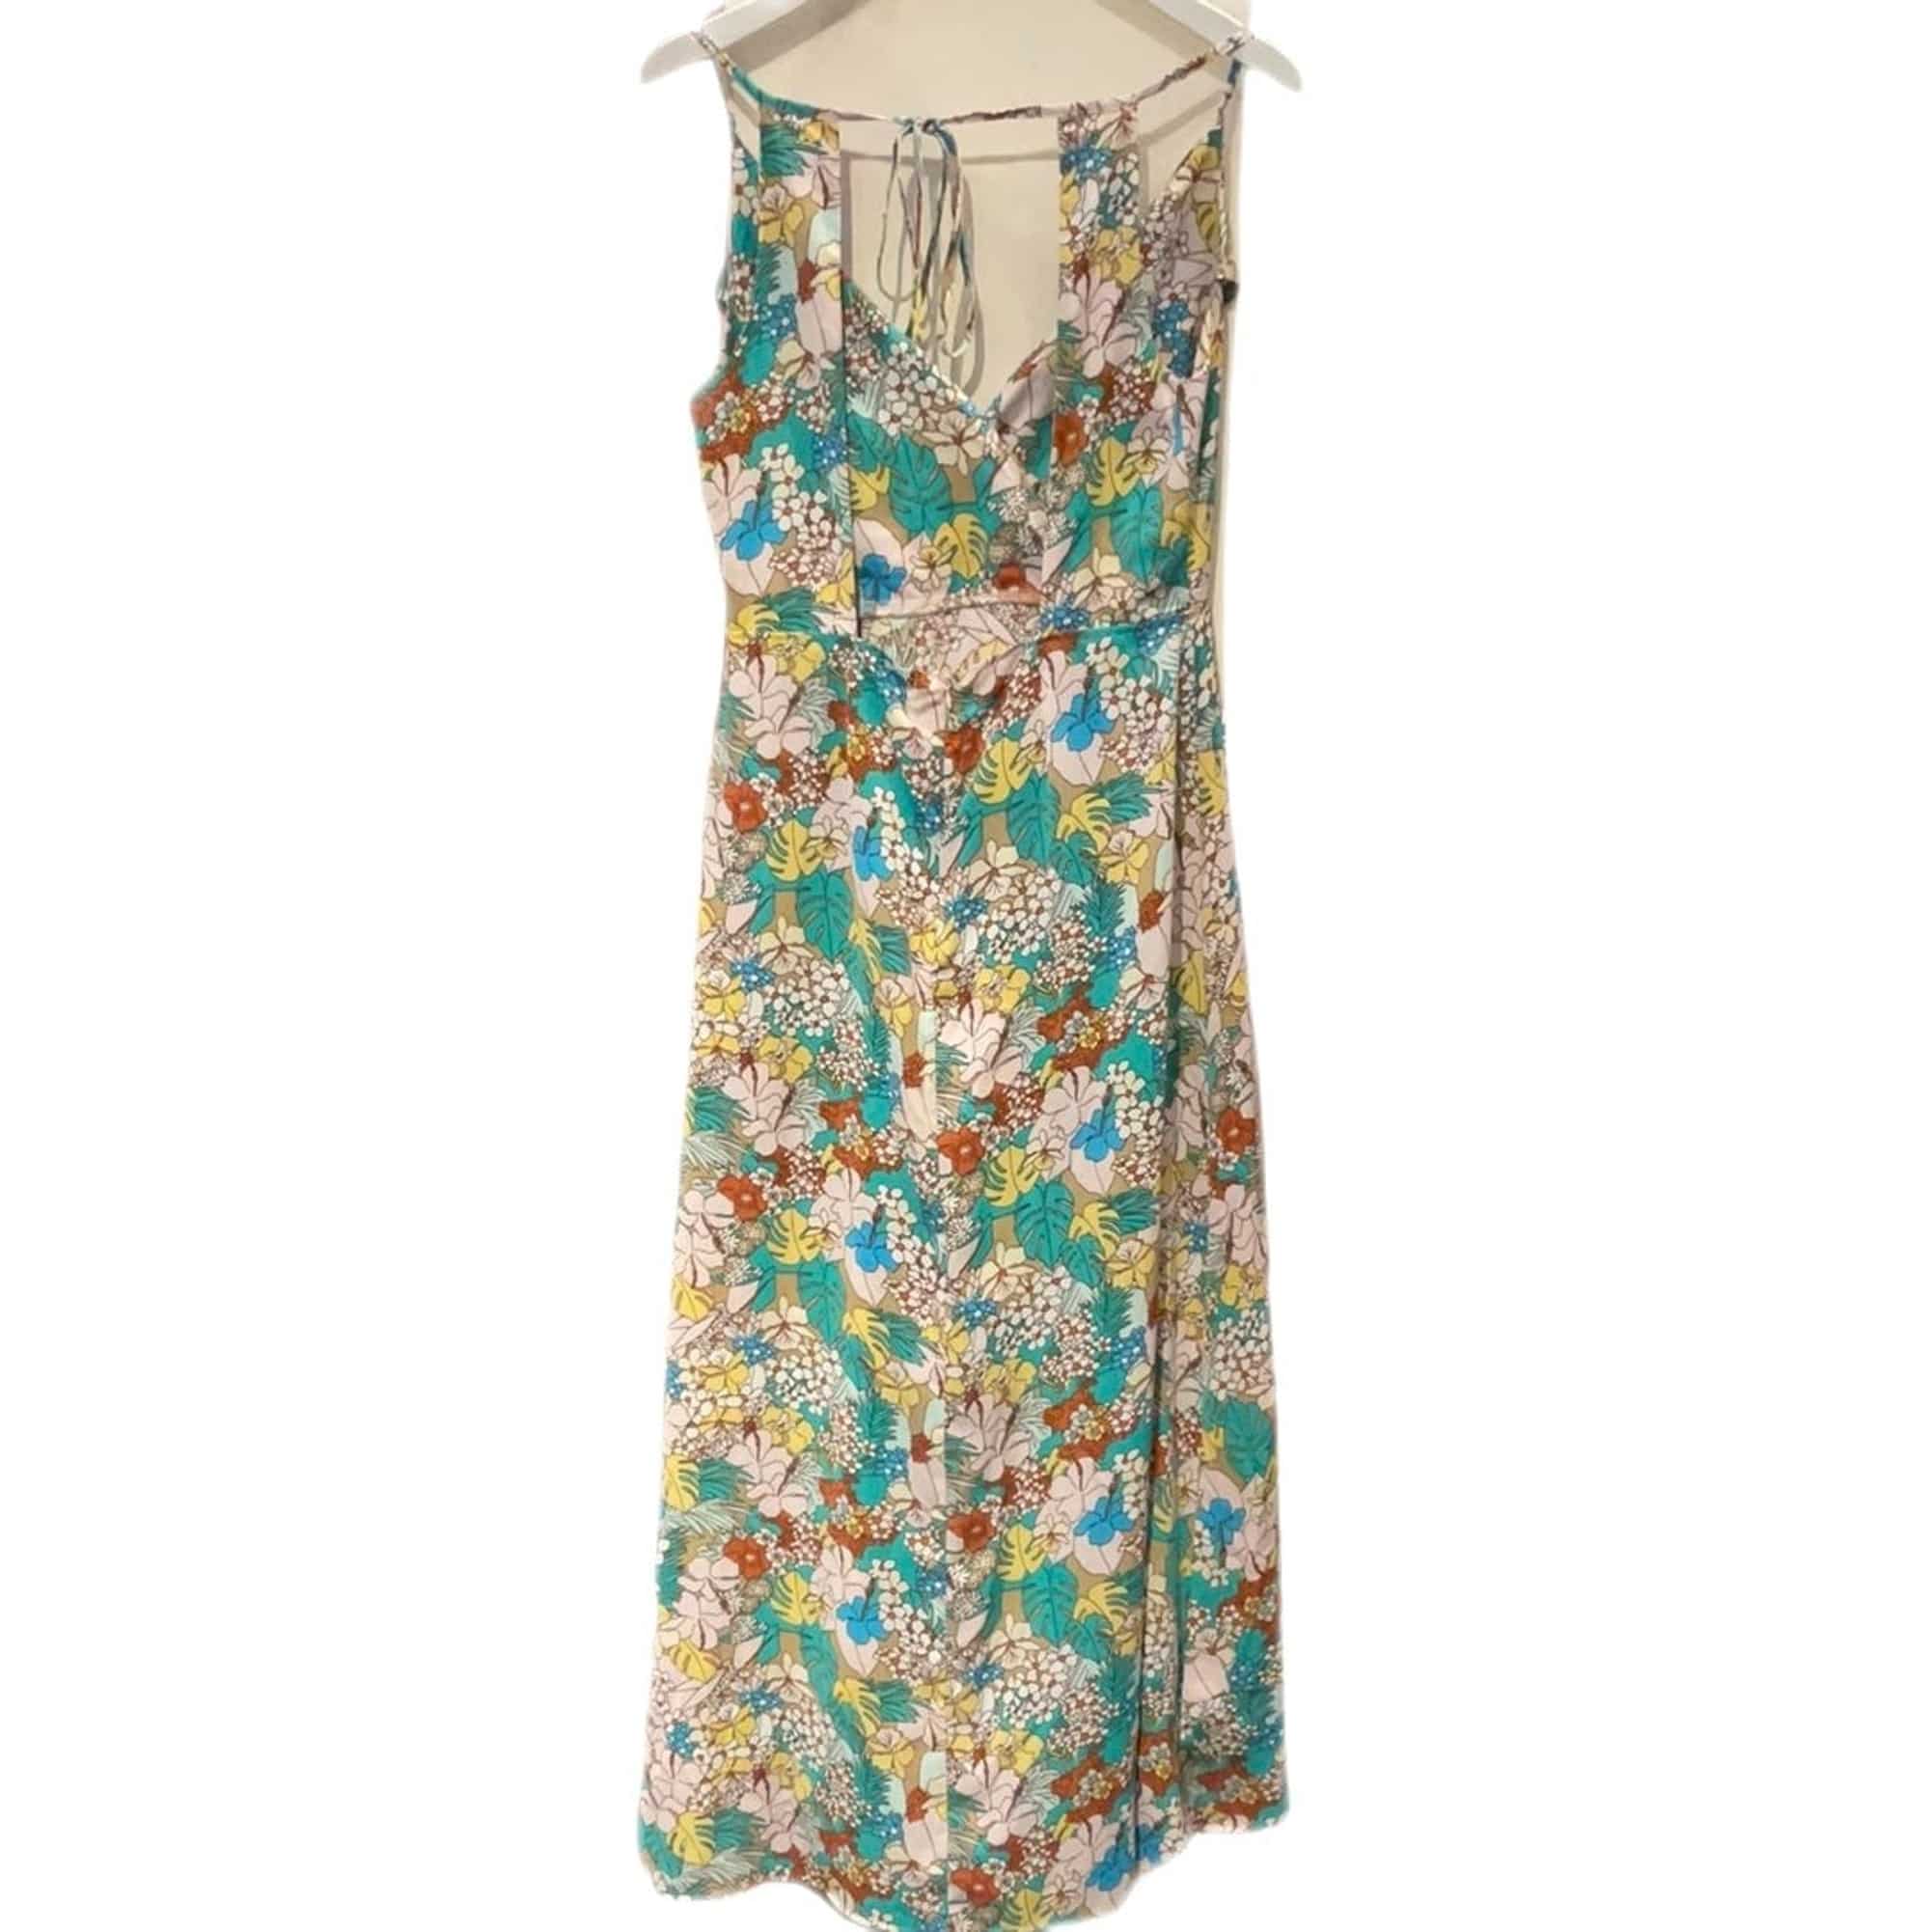 Molly Bracken Dress in Turquoise Maeve - clever alice